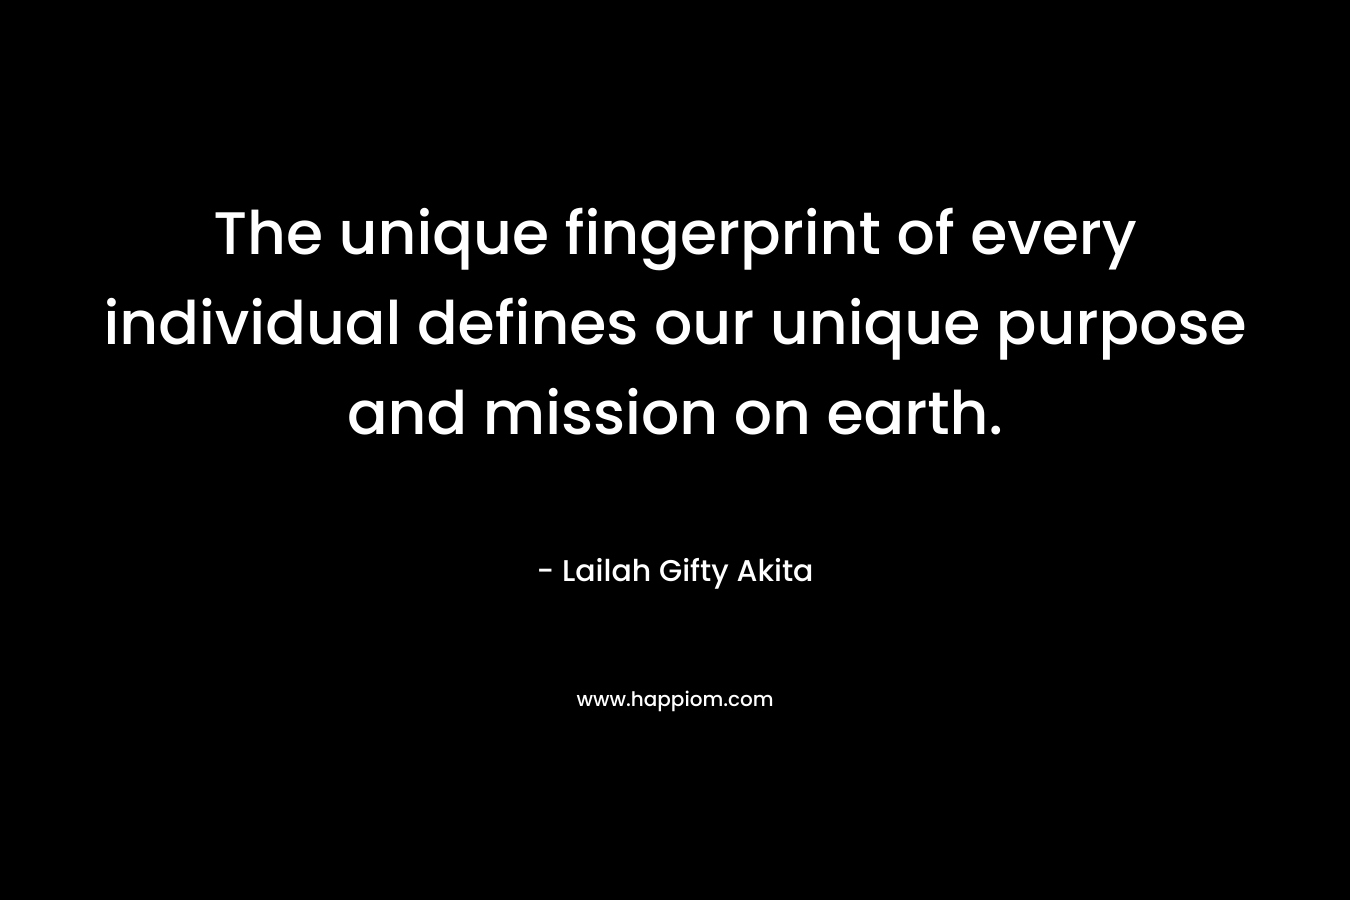 The unique fingerprint of every individual defines our unique purpose and mission on earth. – Lailah Gifty Akita